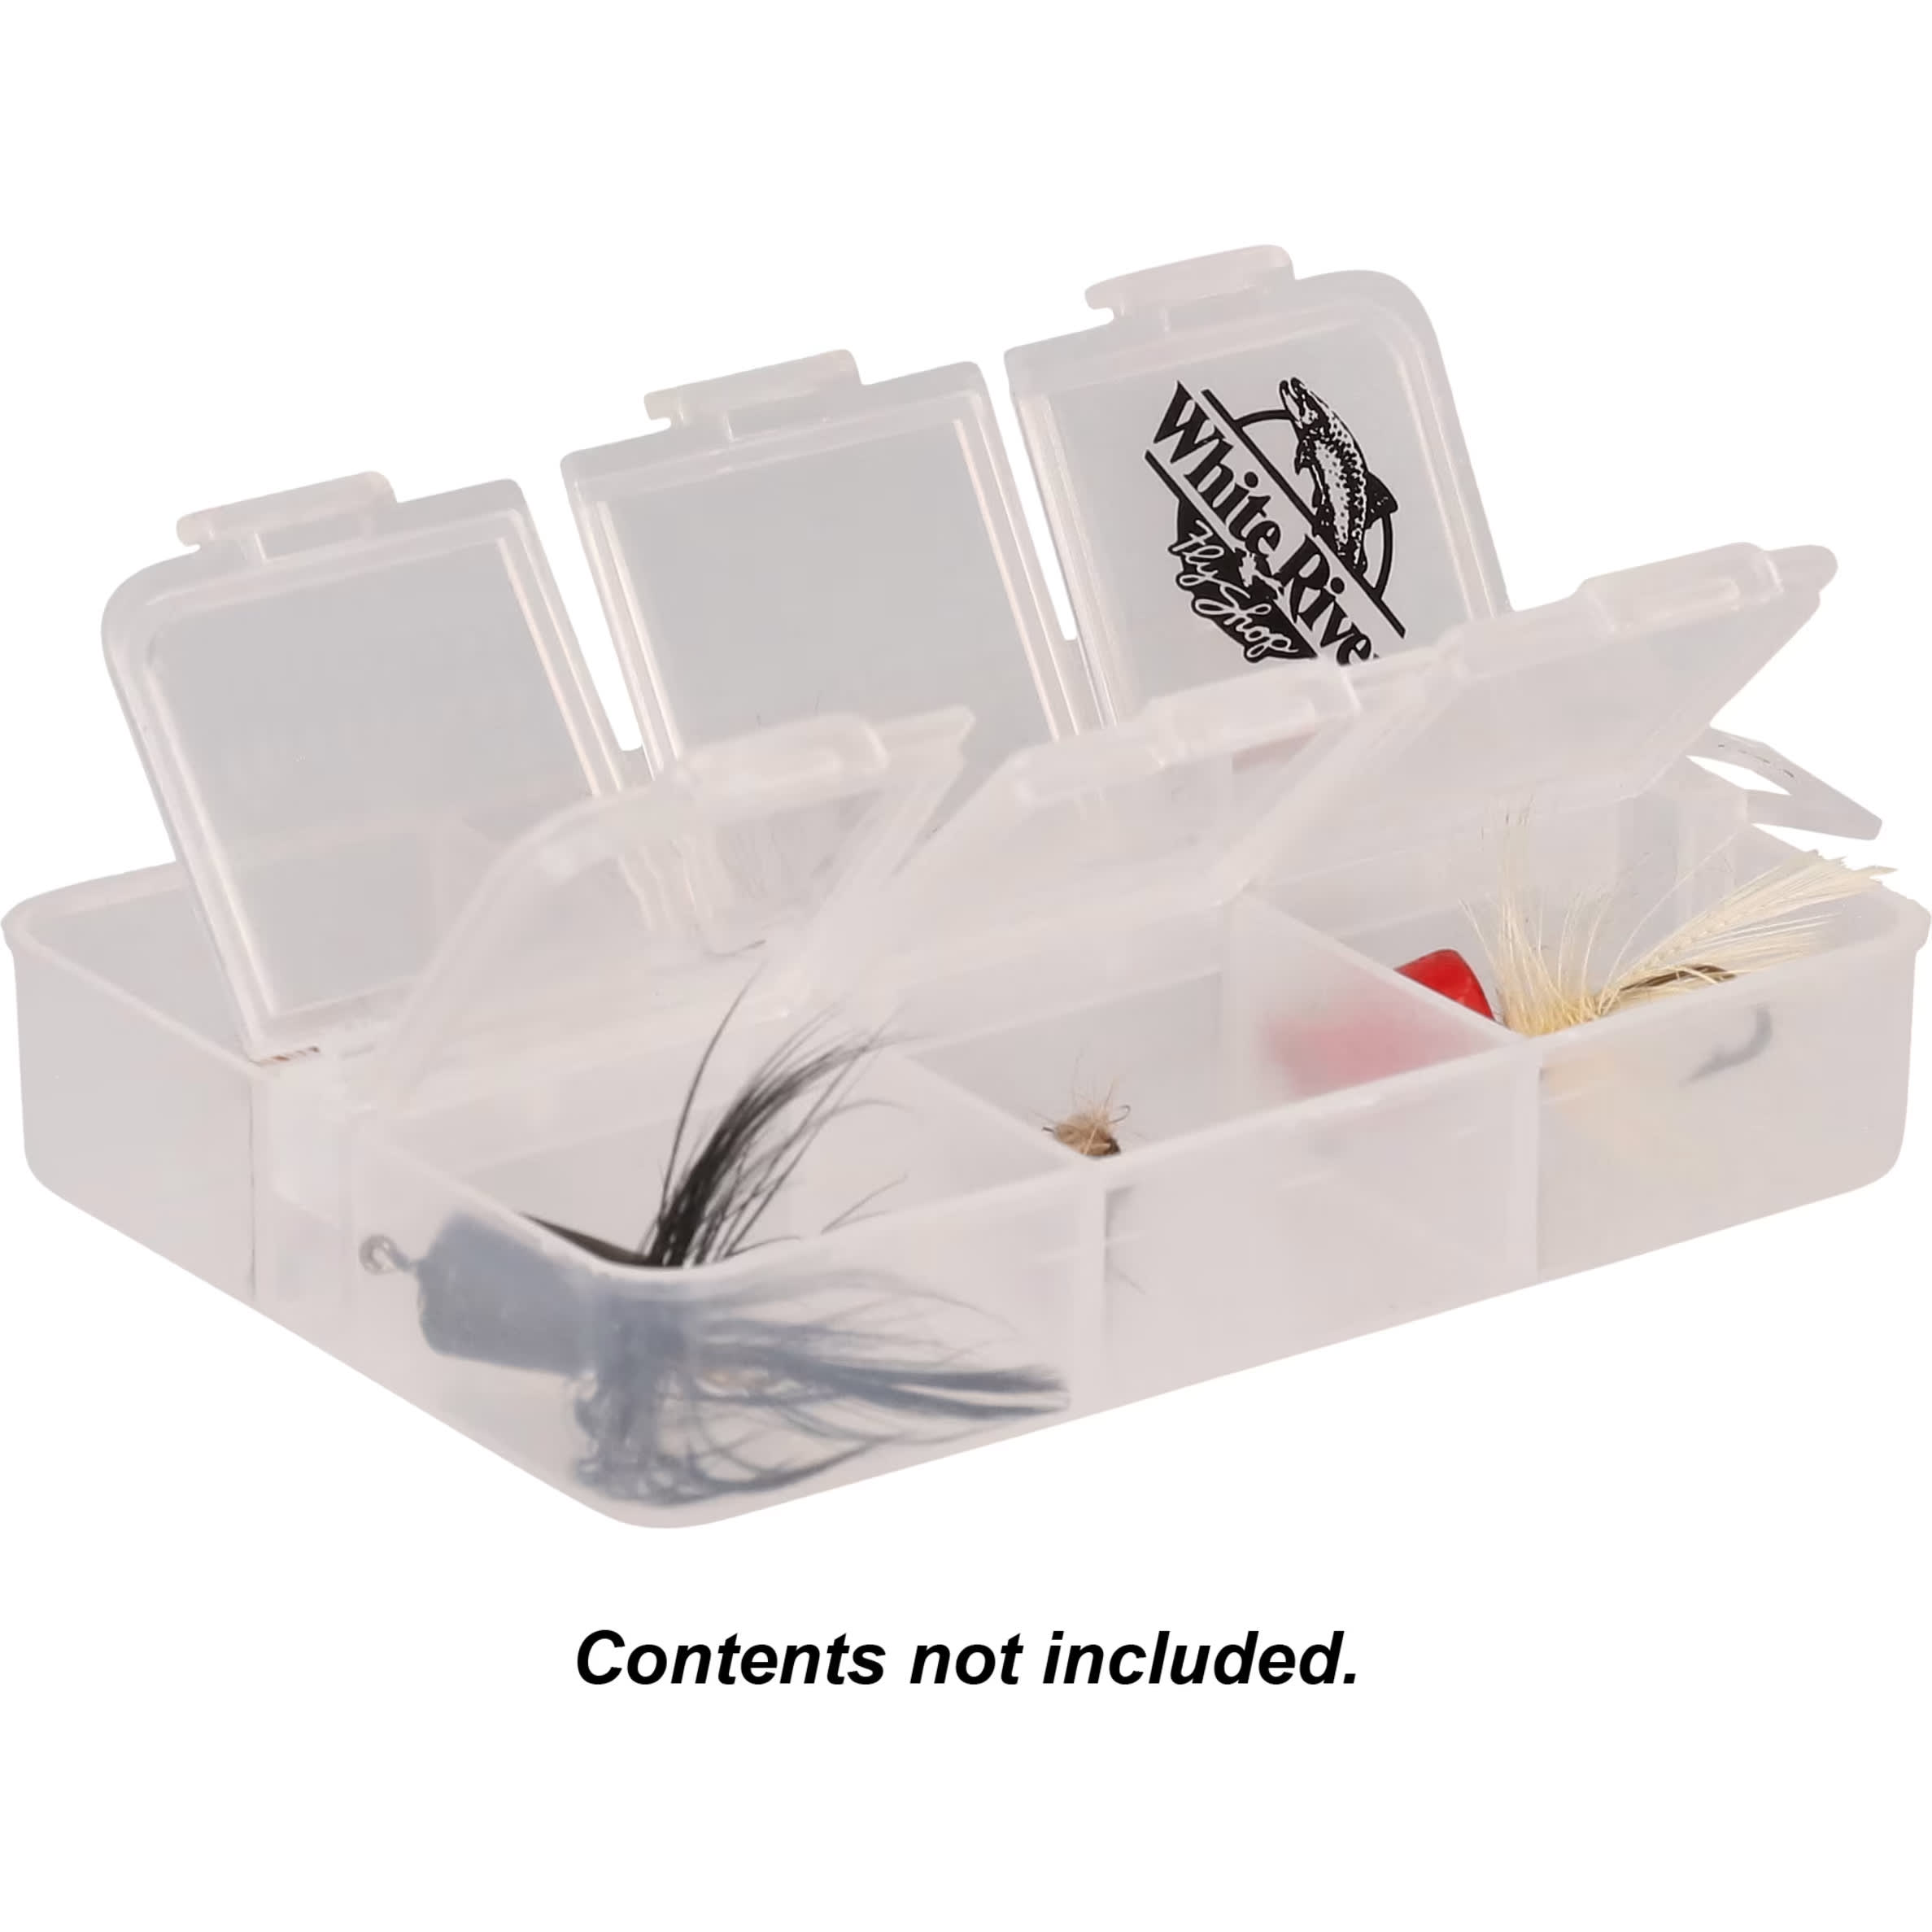 White River Fly Shop® Multicompartment Fly Box